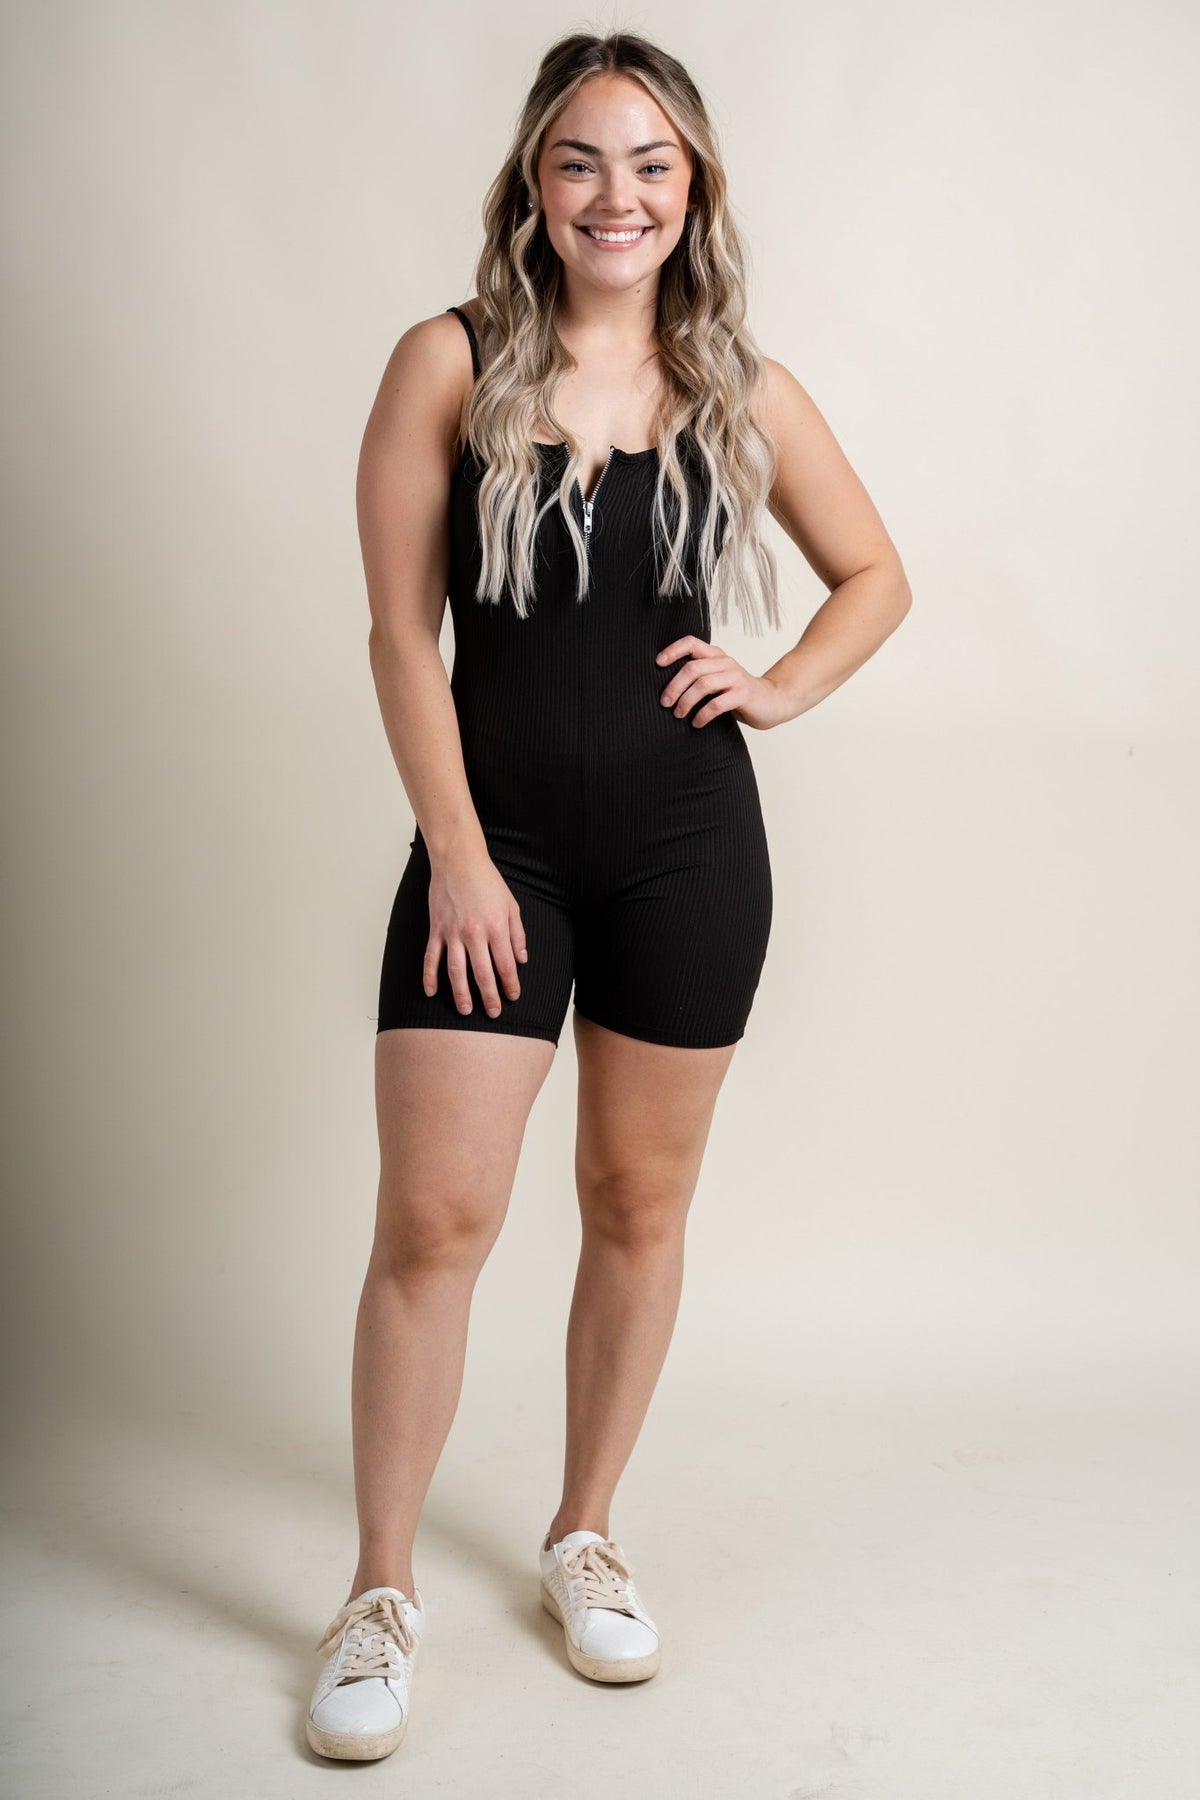 Ribbed biker romper with zipper black - Cute Romper - Trendy Rompers and Pantsuits at Lush Fashion Lounge Boutique in Oklahoma City